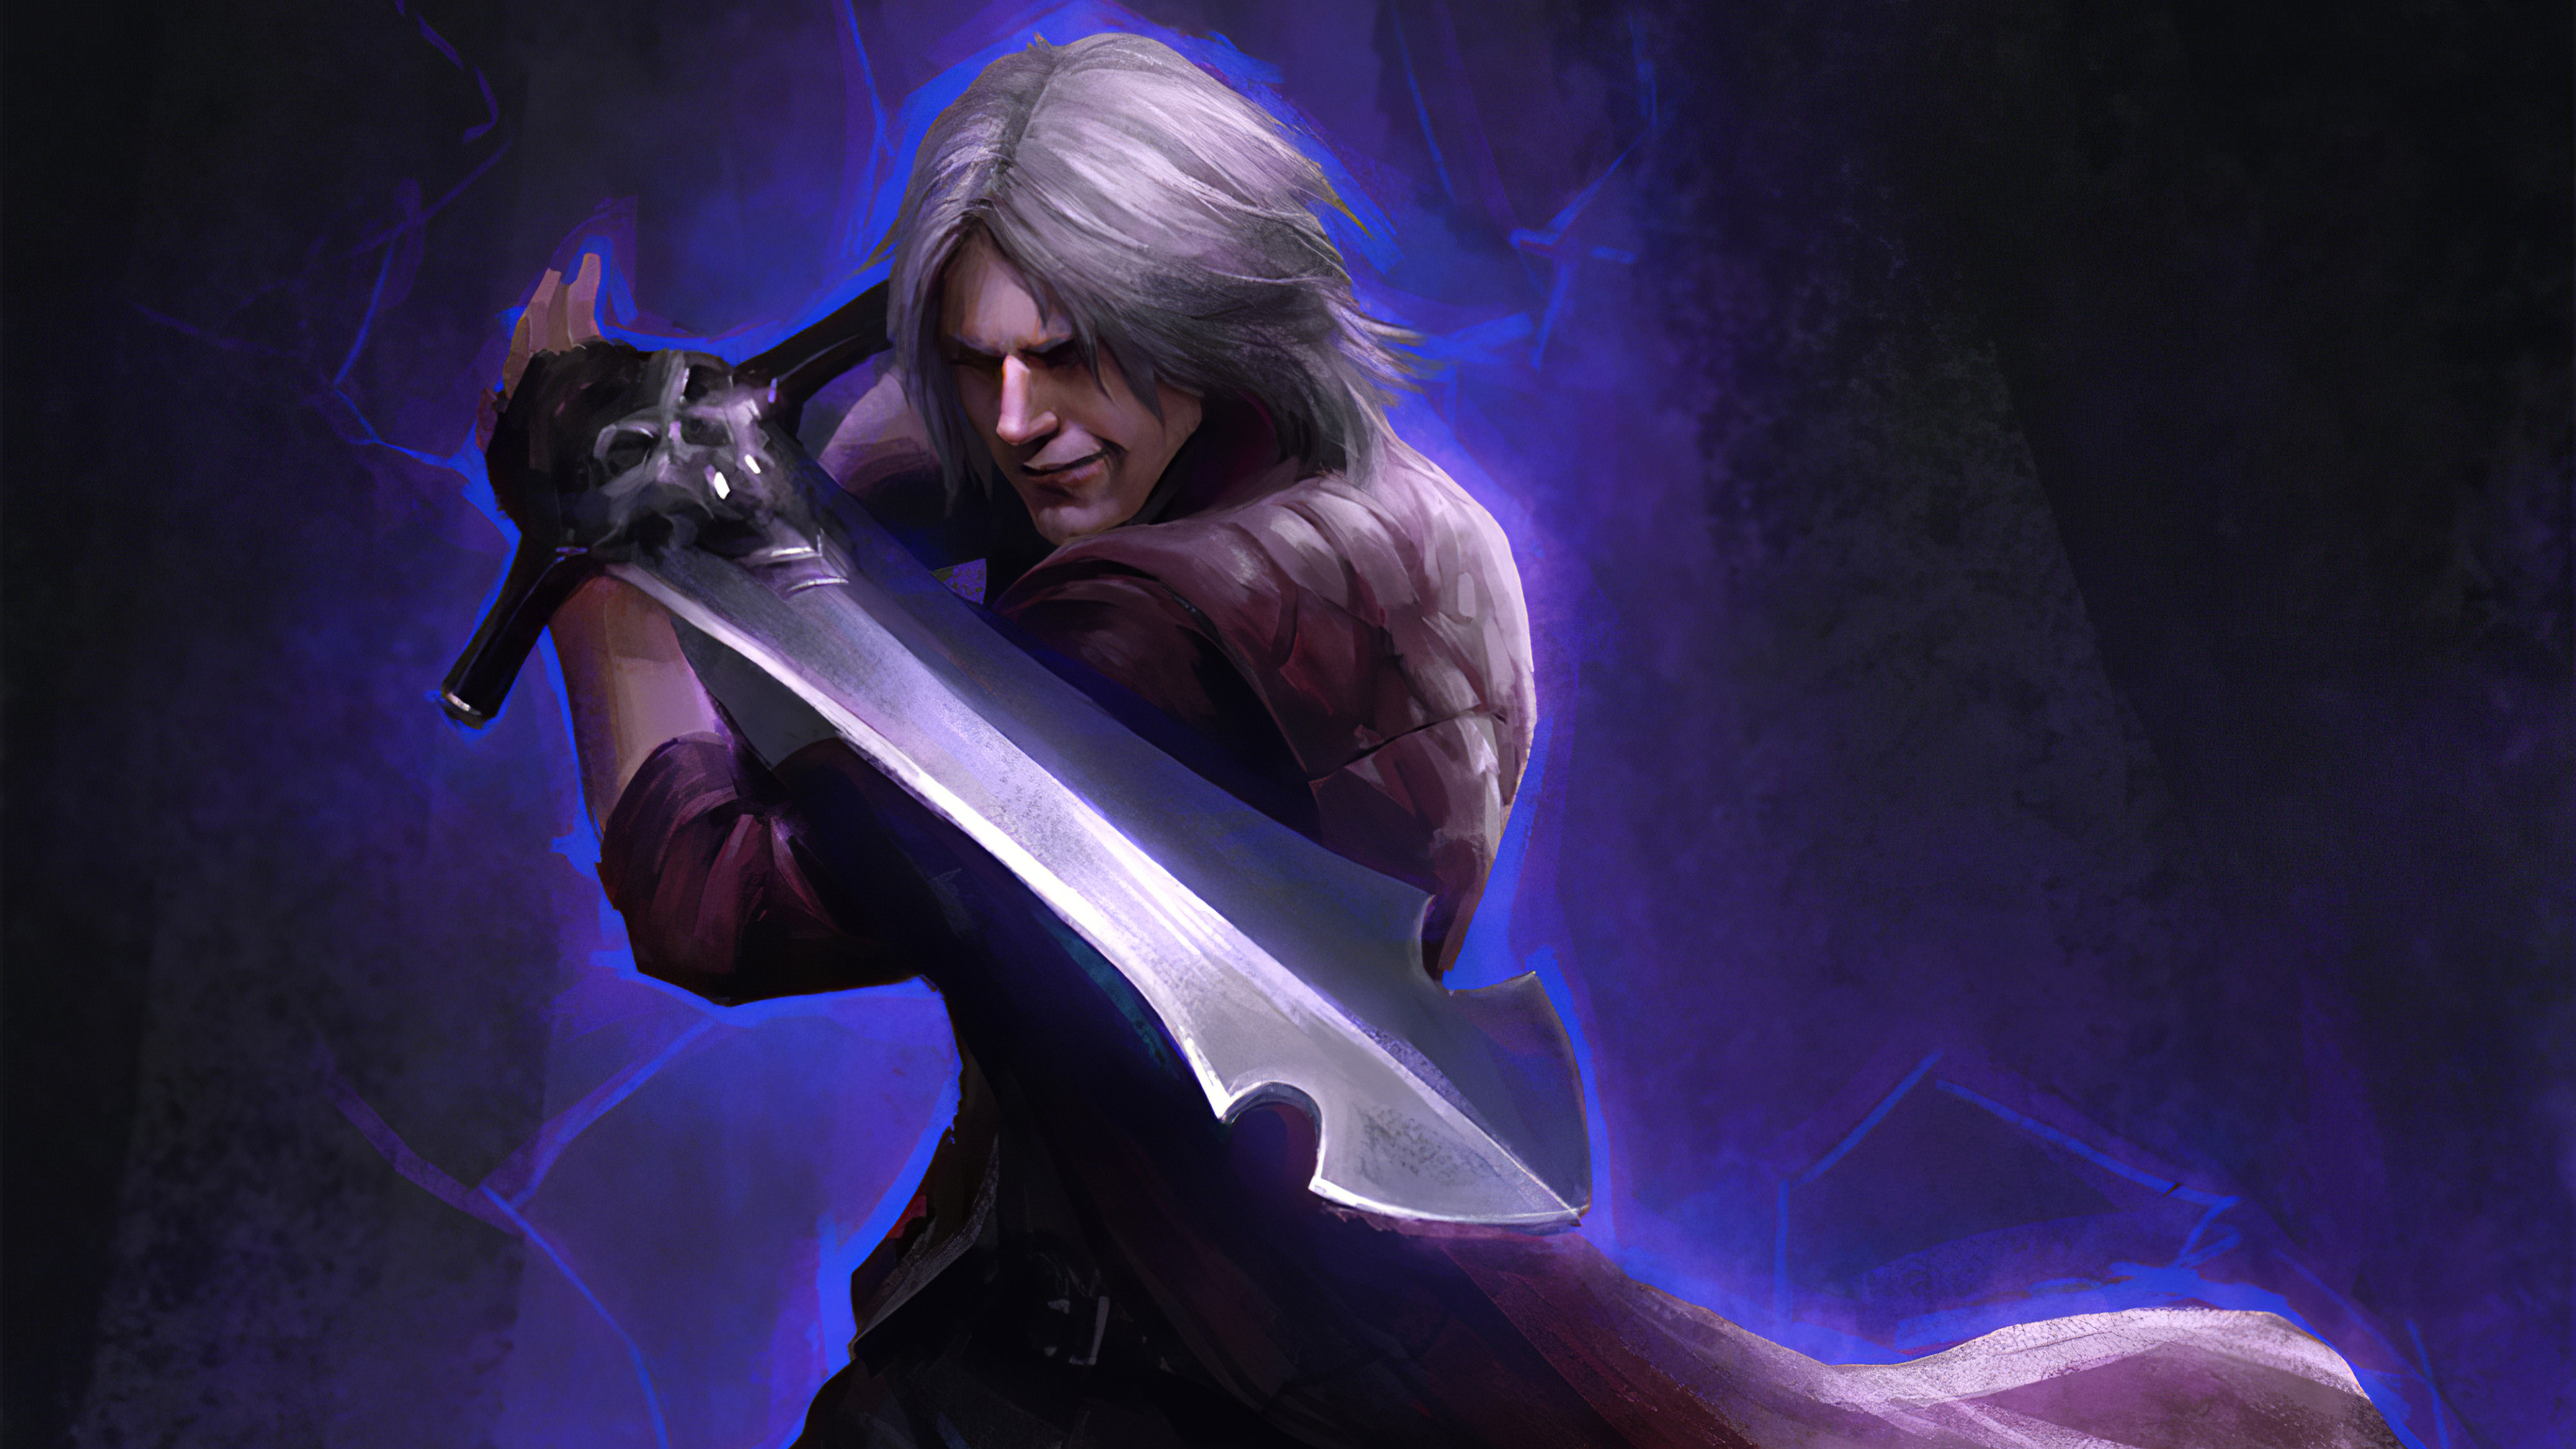 the swordsman son devil may cry 5 4k iPhone 8 Wallpapers Free Download